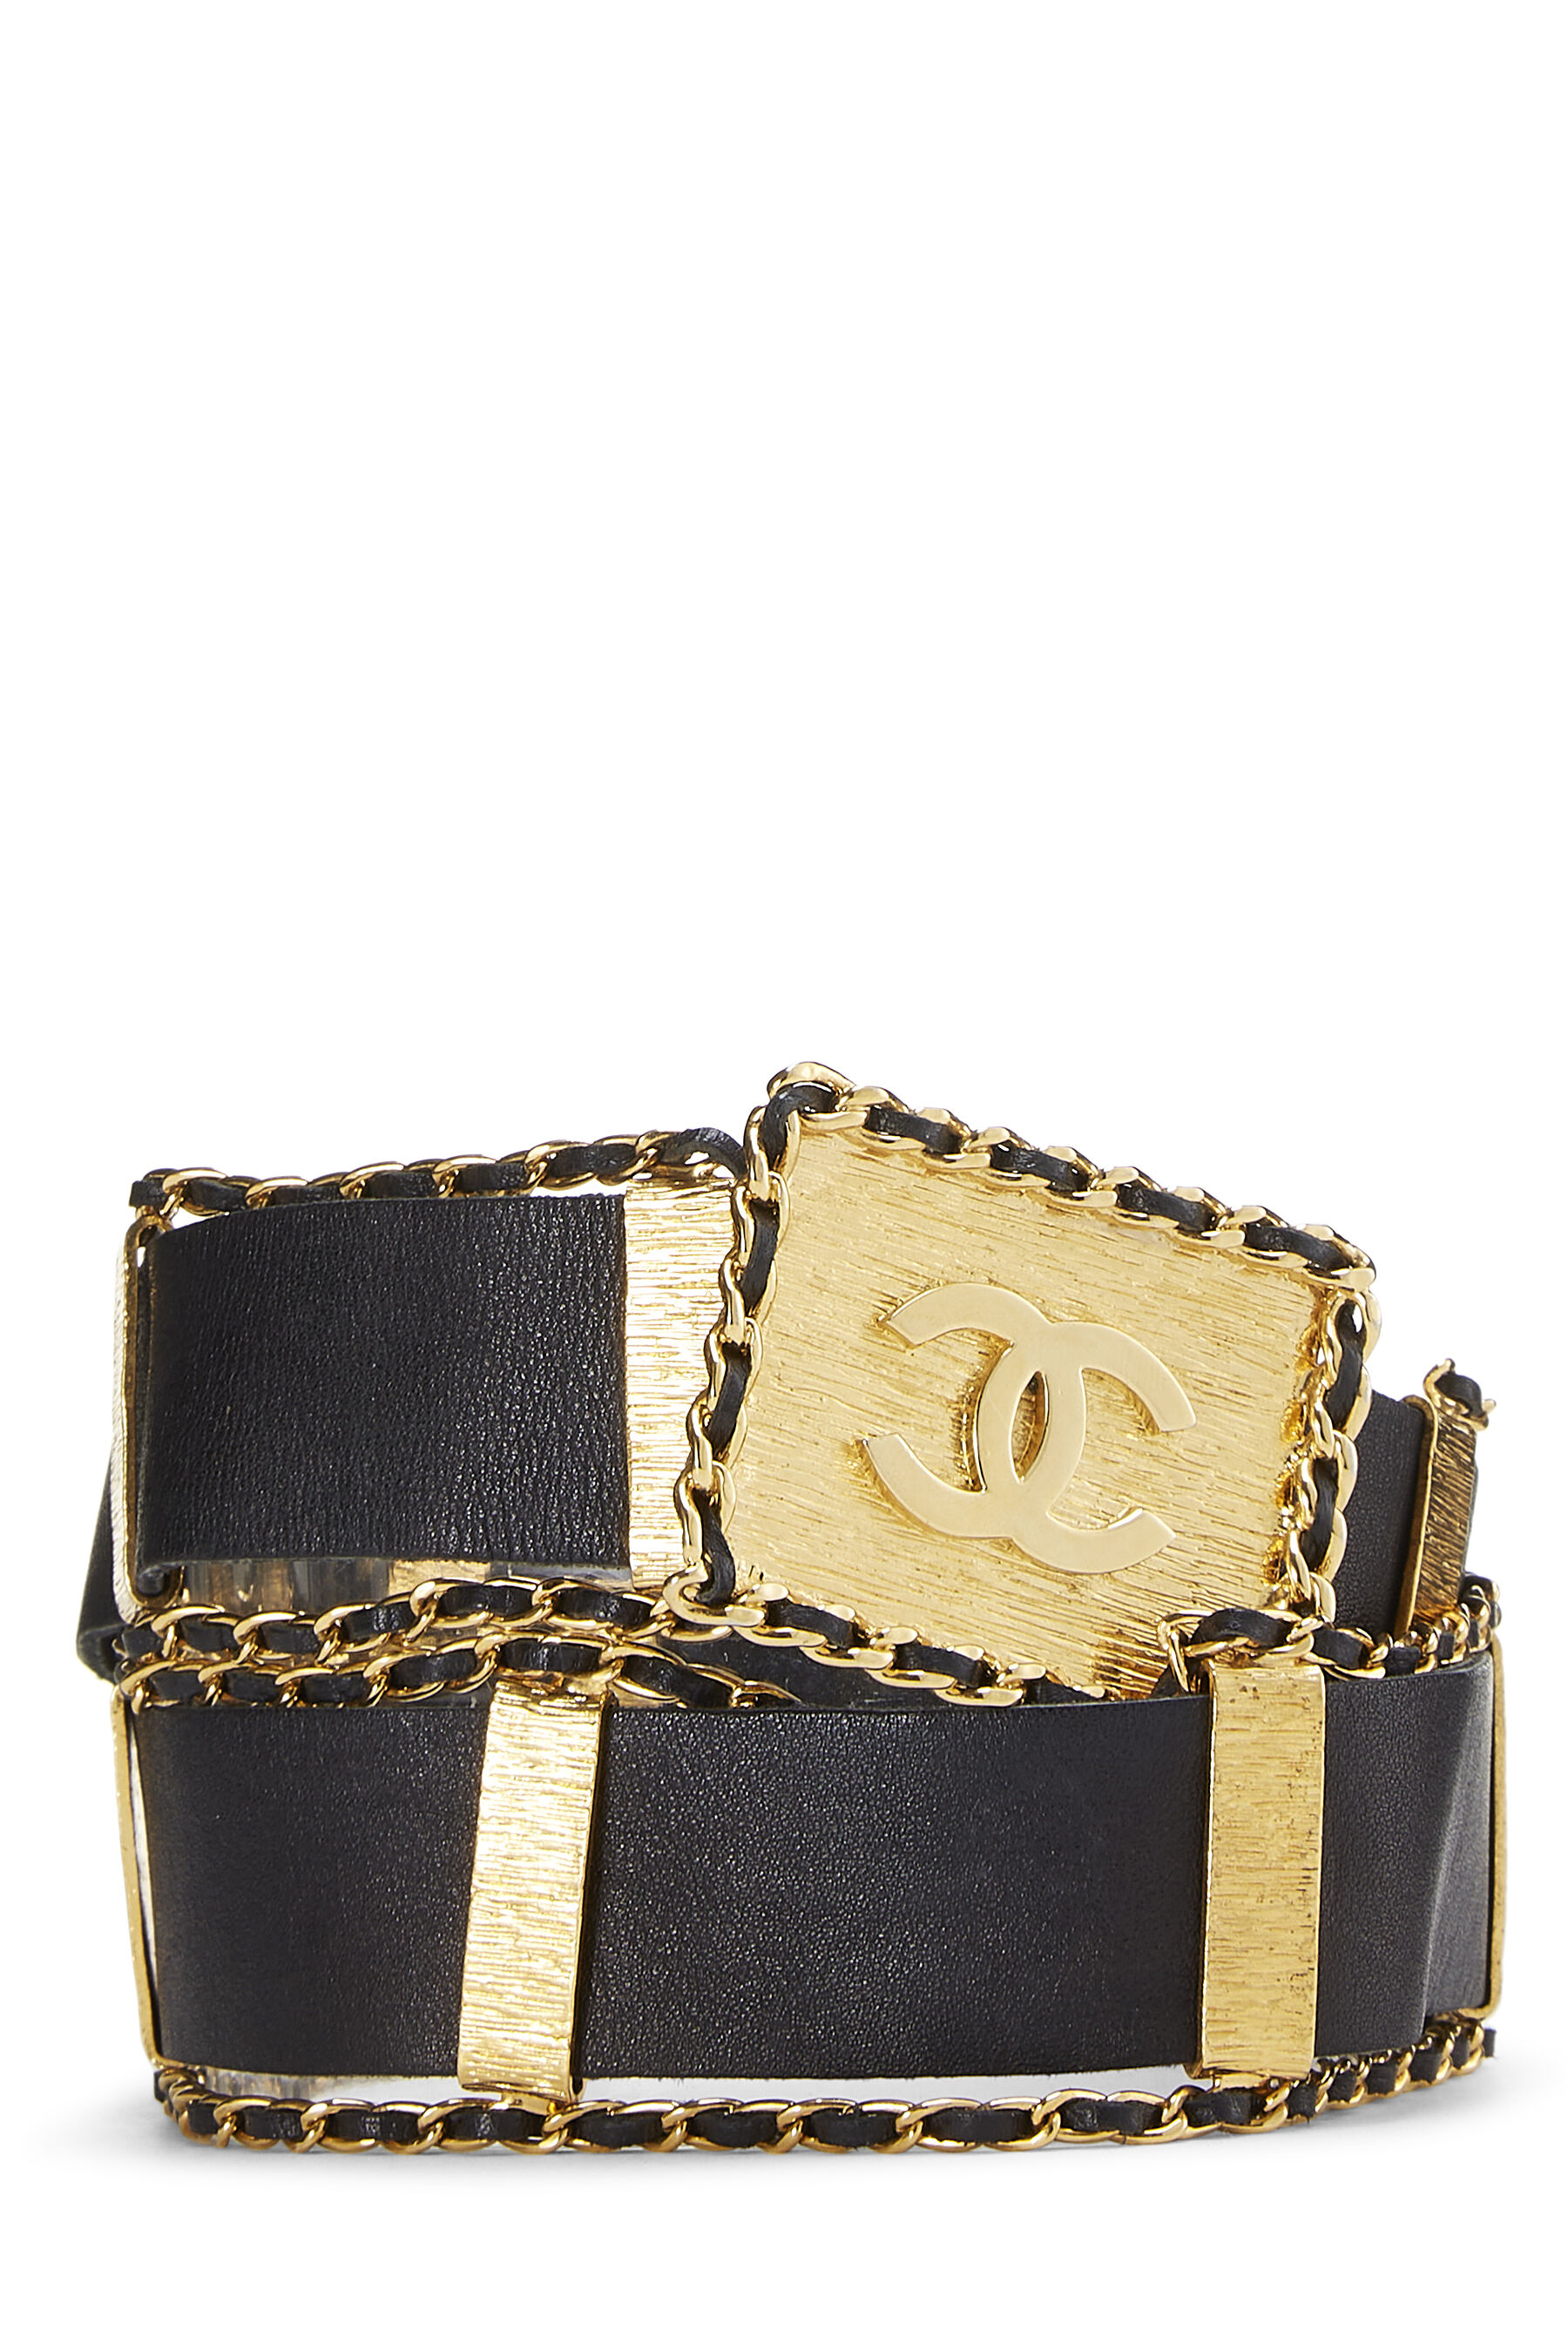 Chanel Buckle Belt Black Gold Leather 70/28 96A Authentic 68472